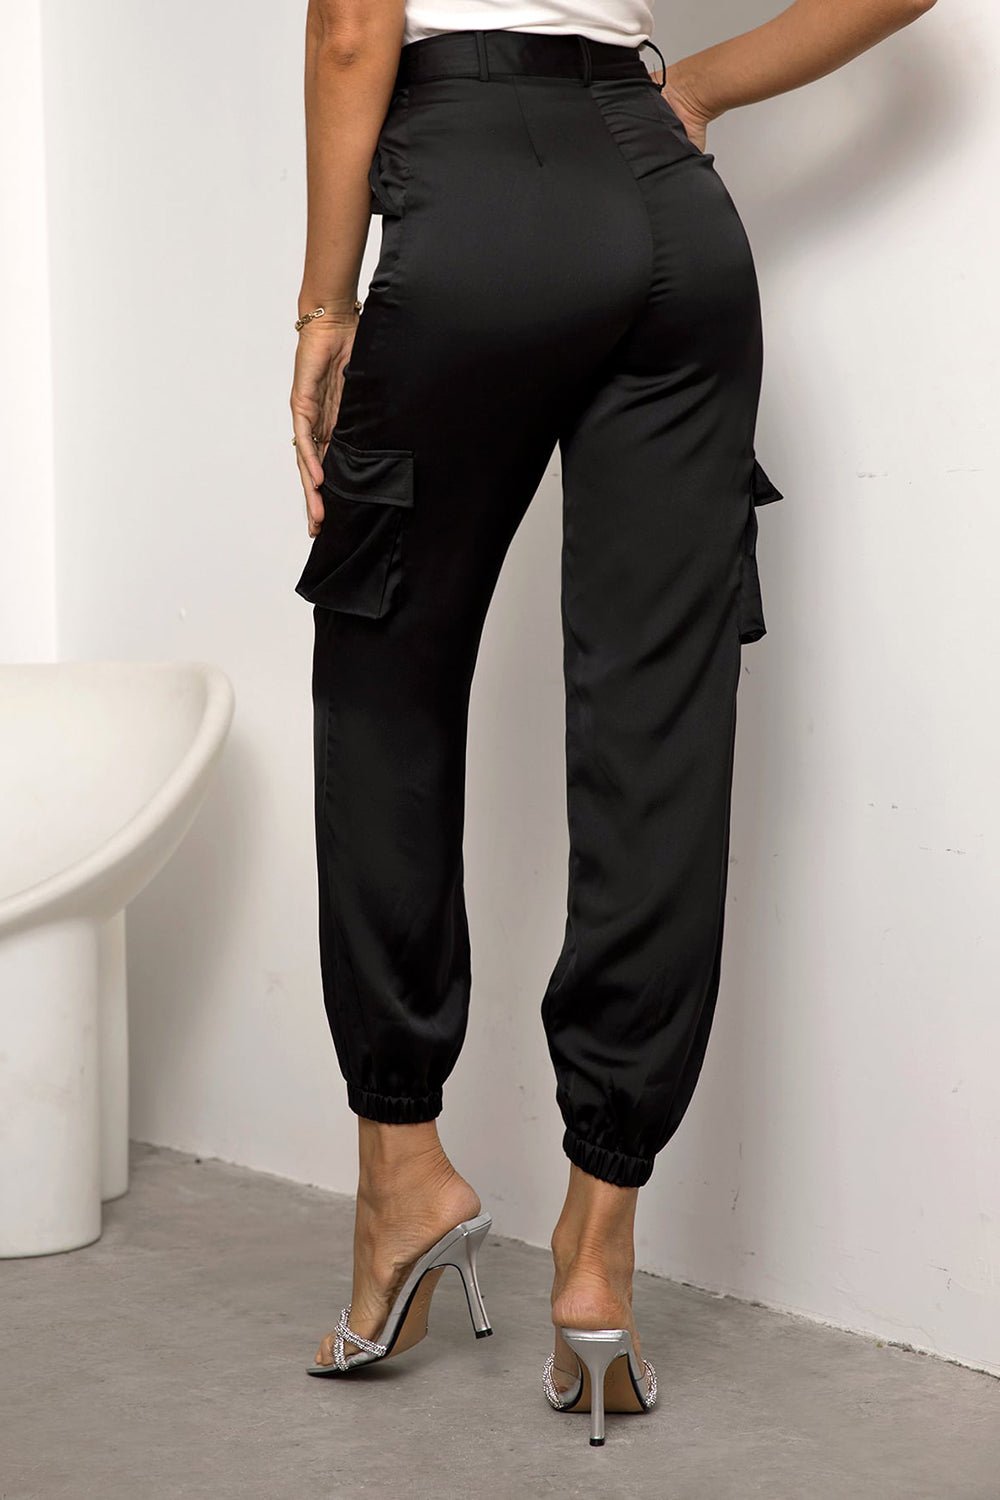 High Waist Pants with Pockets - Fashion Girl Online Store